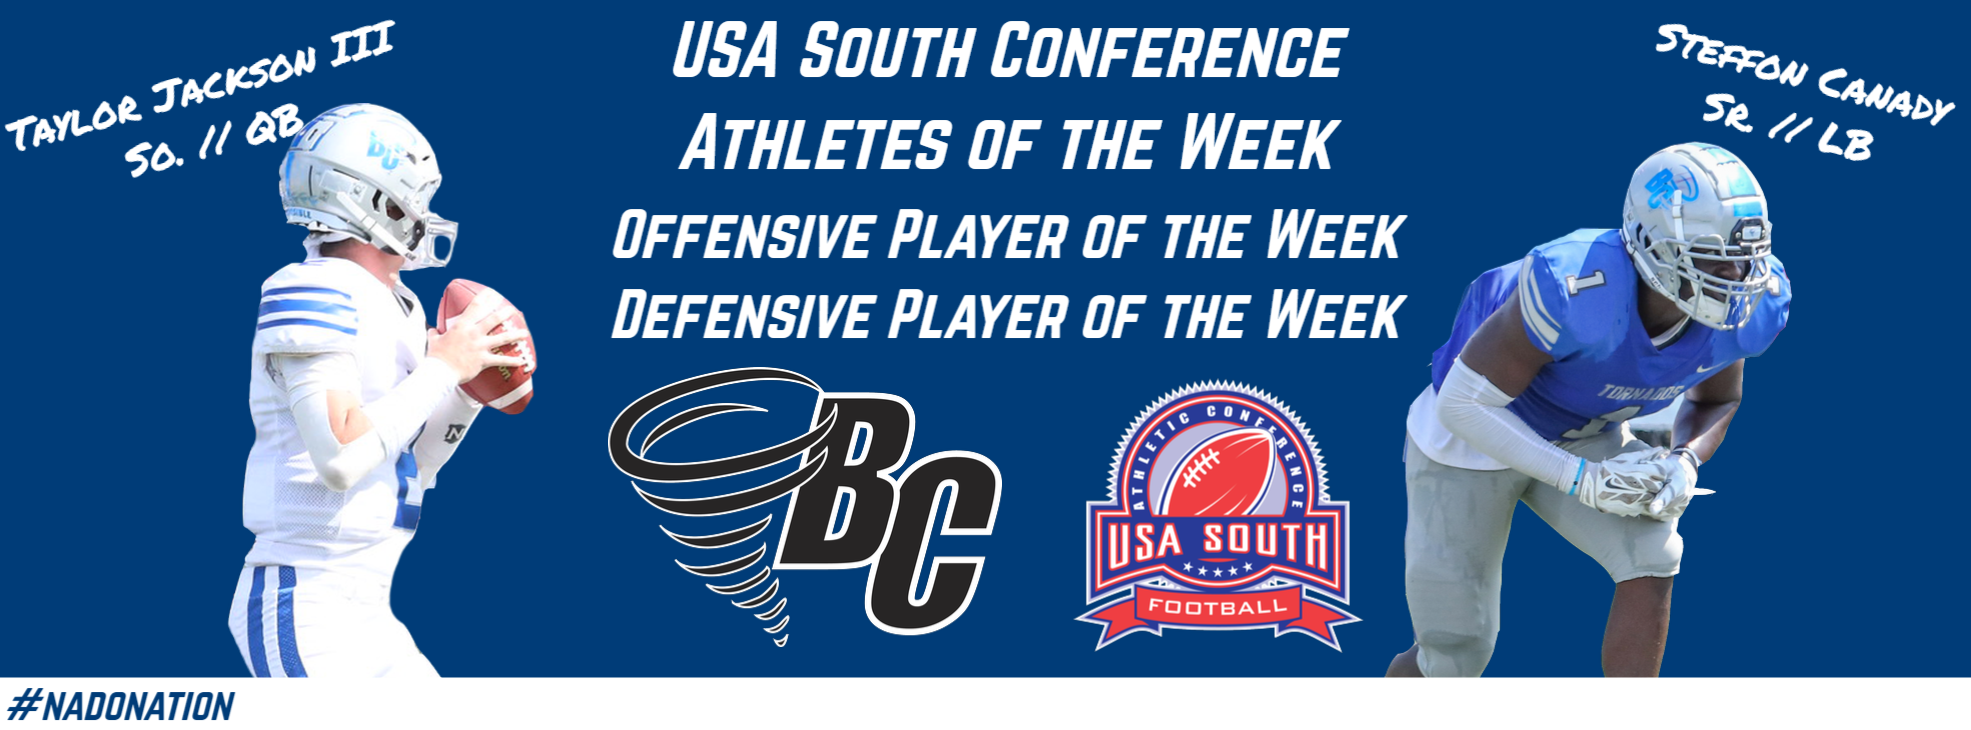 Canady, Jackson III Take Home Conference Player of the Week Honors